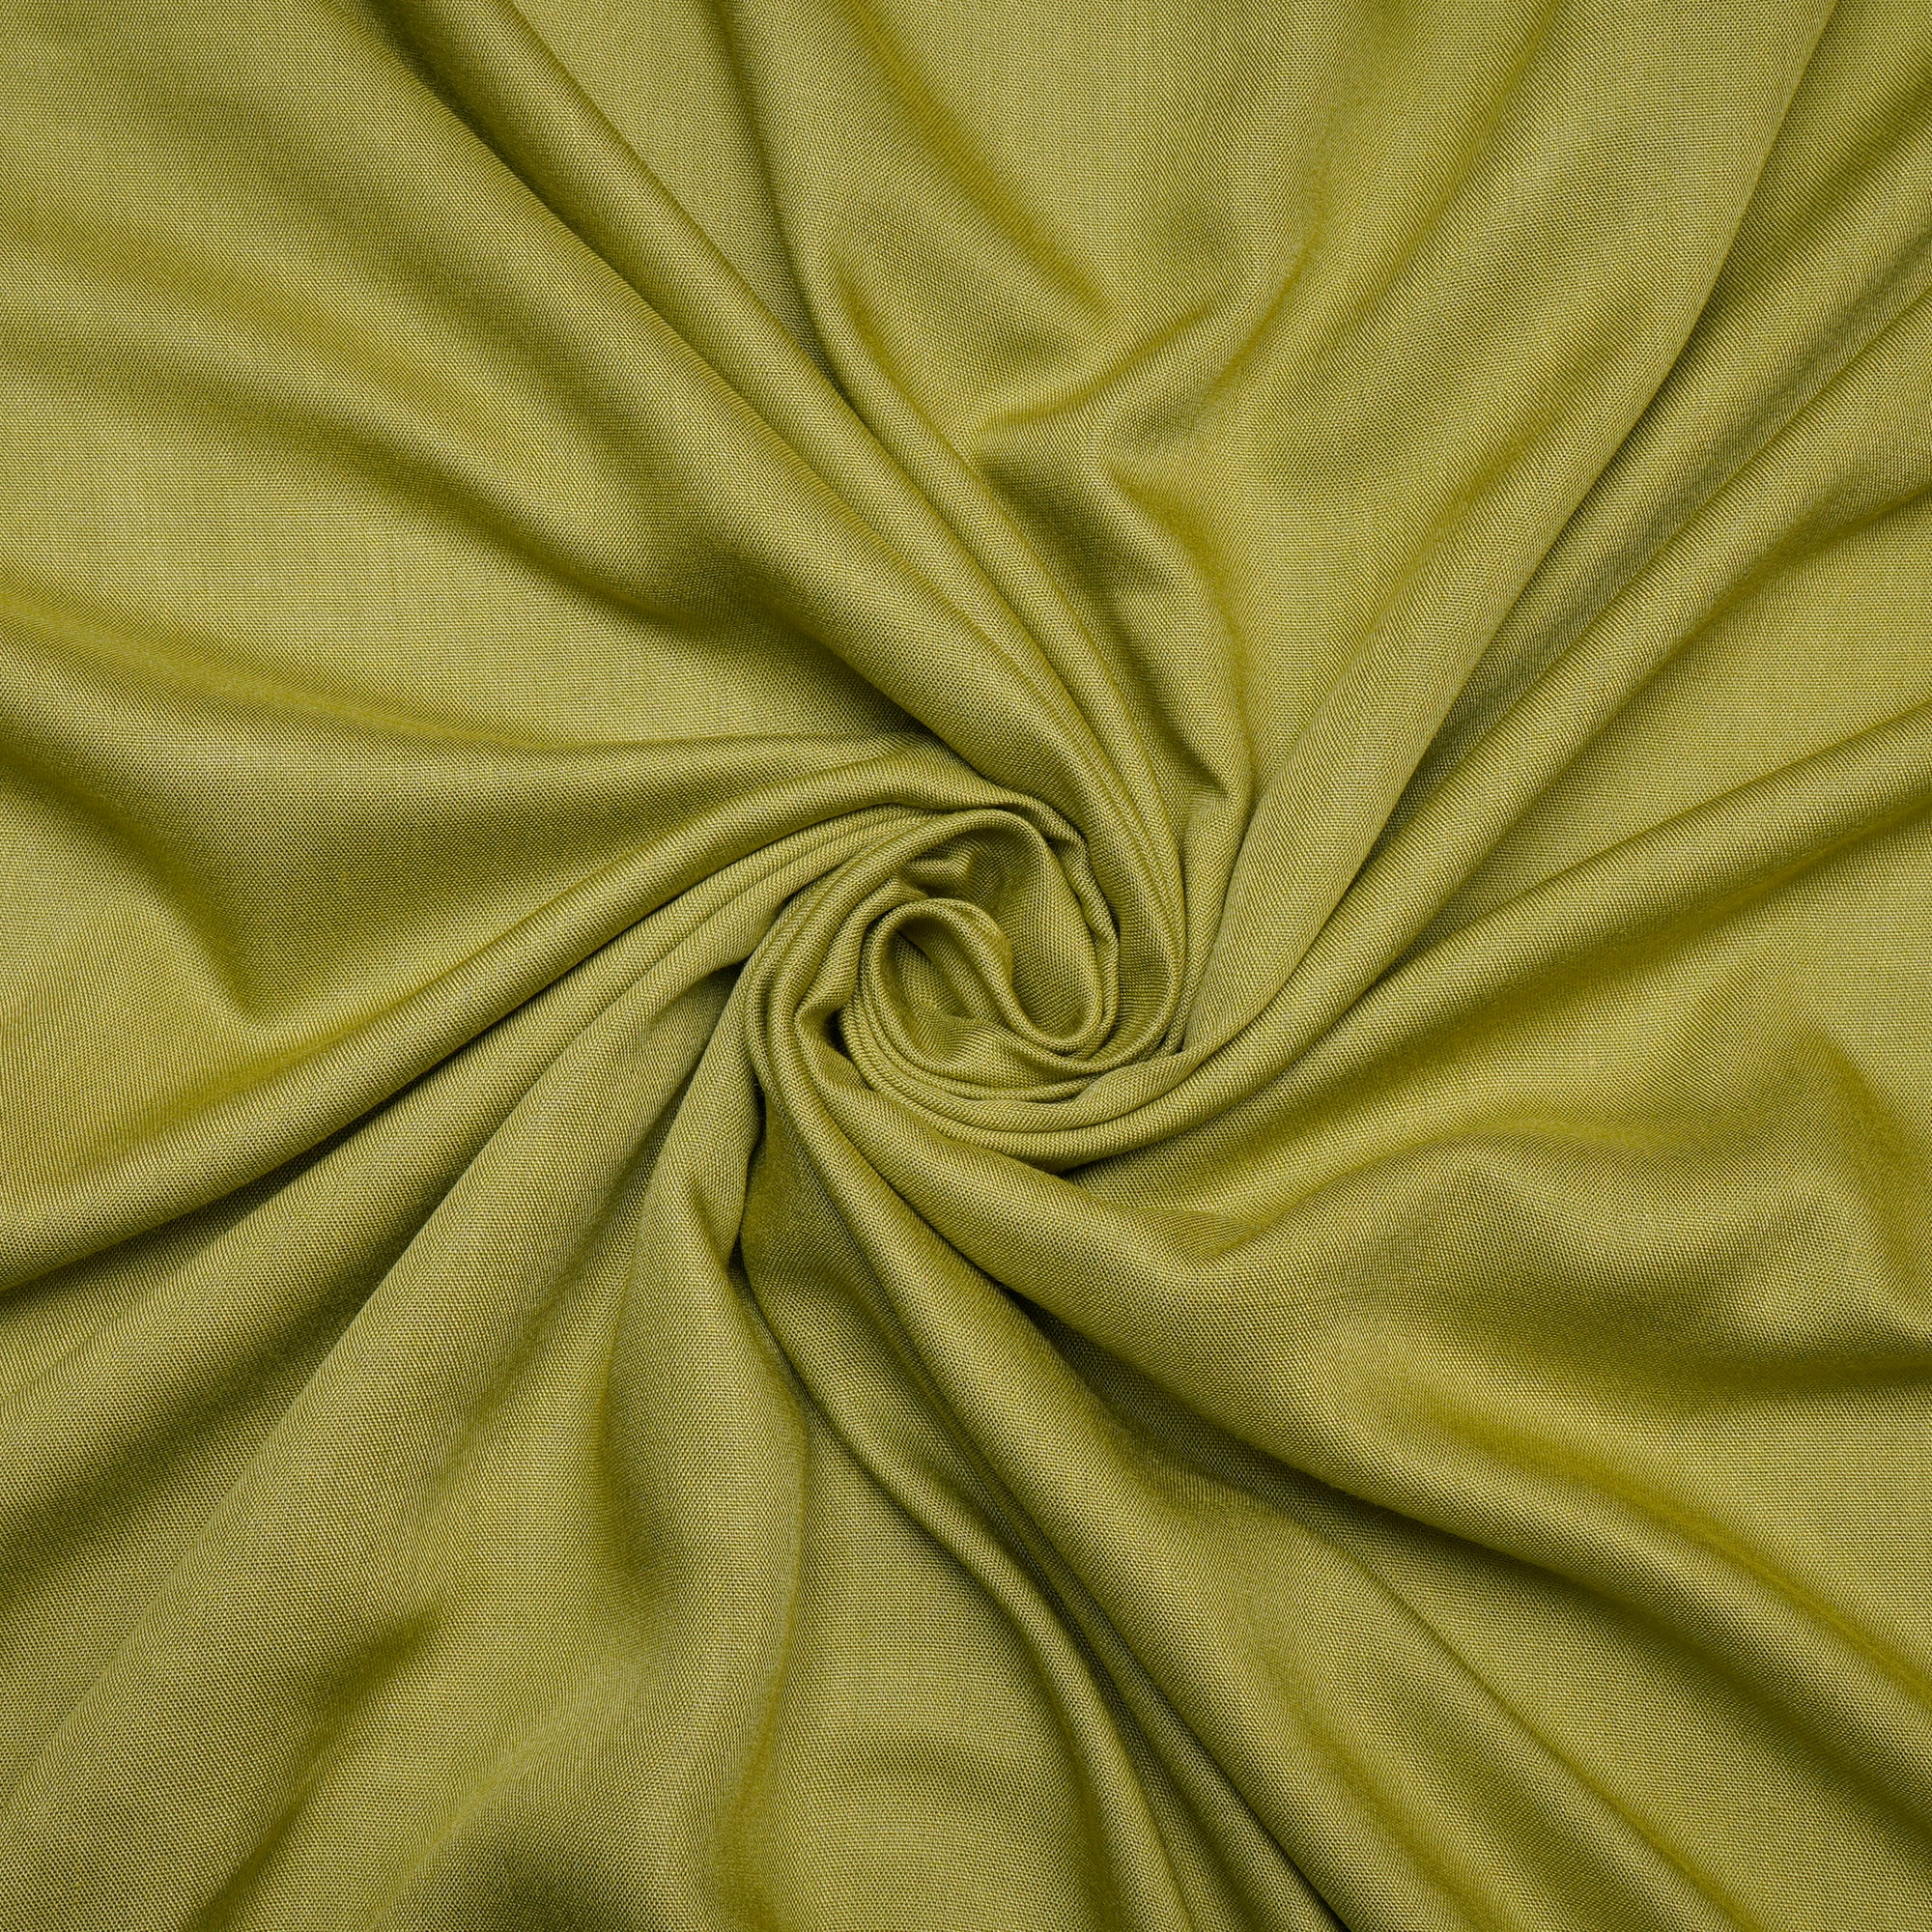 Buy Light Olive Color Viscose Rayon Fabric 68439-D/3